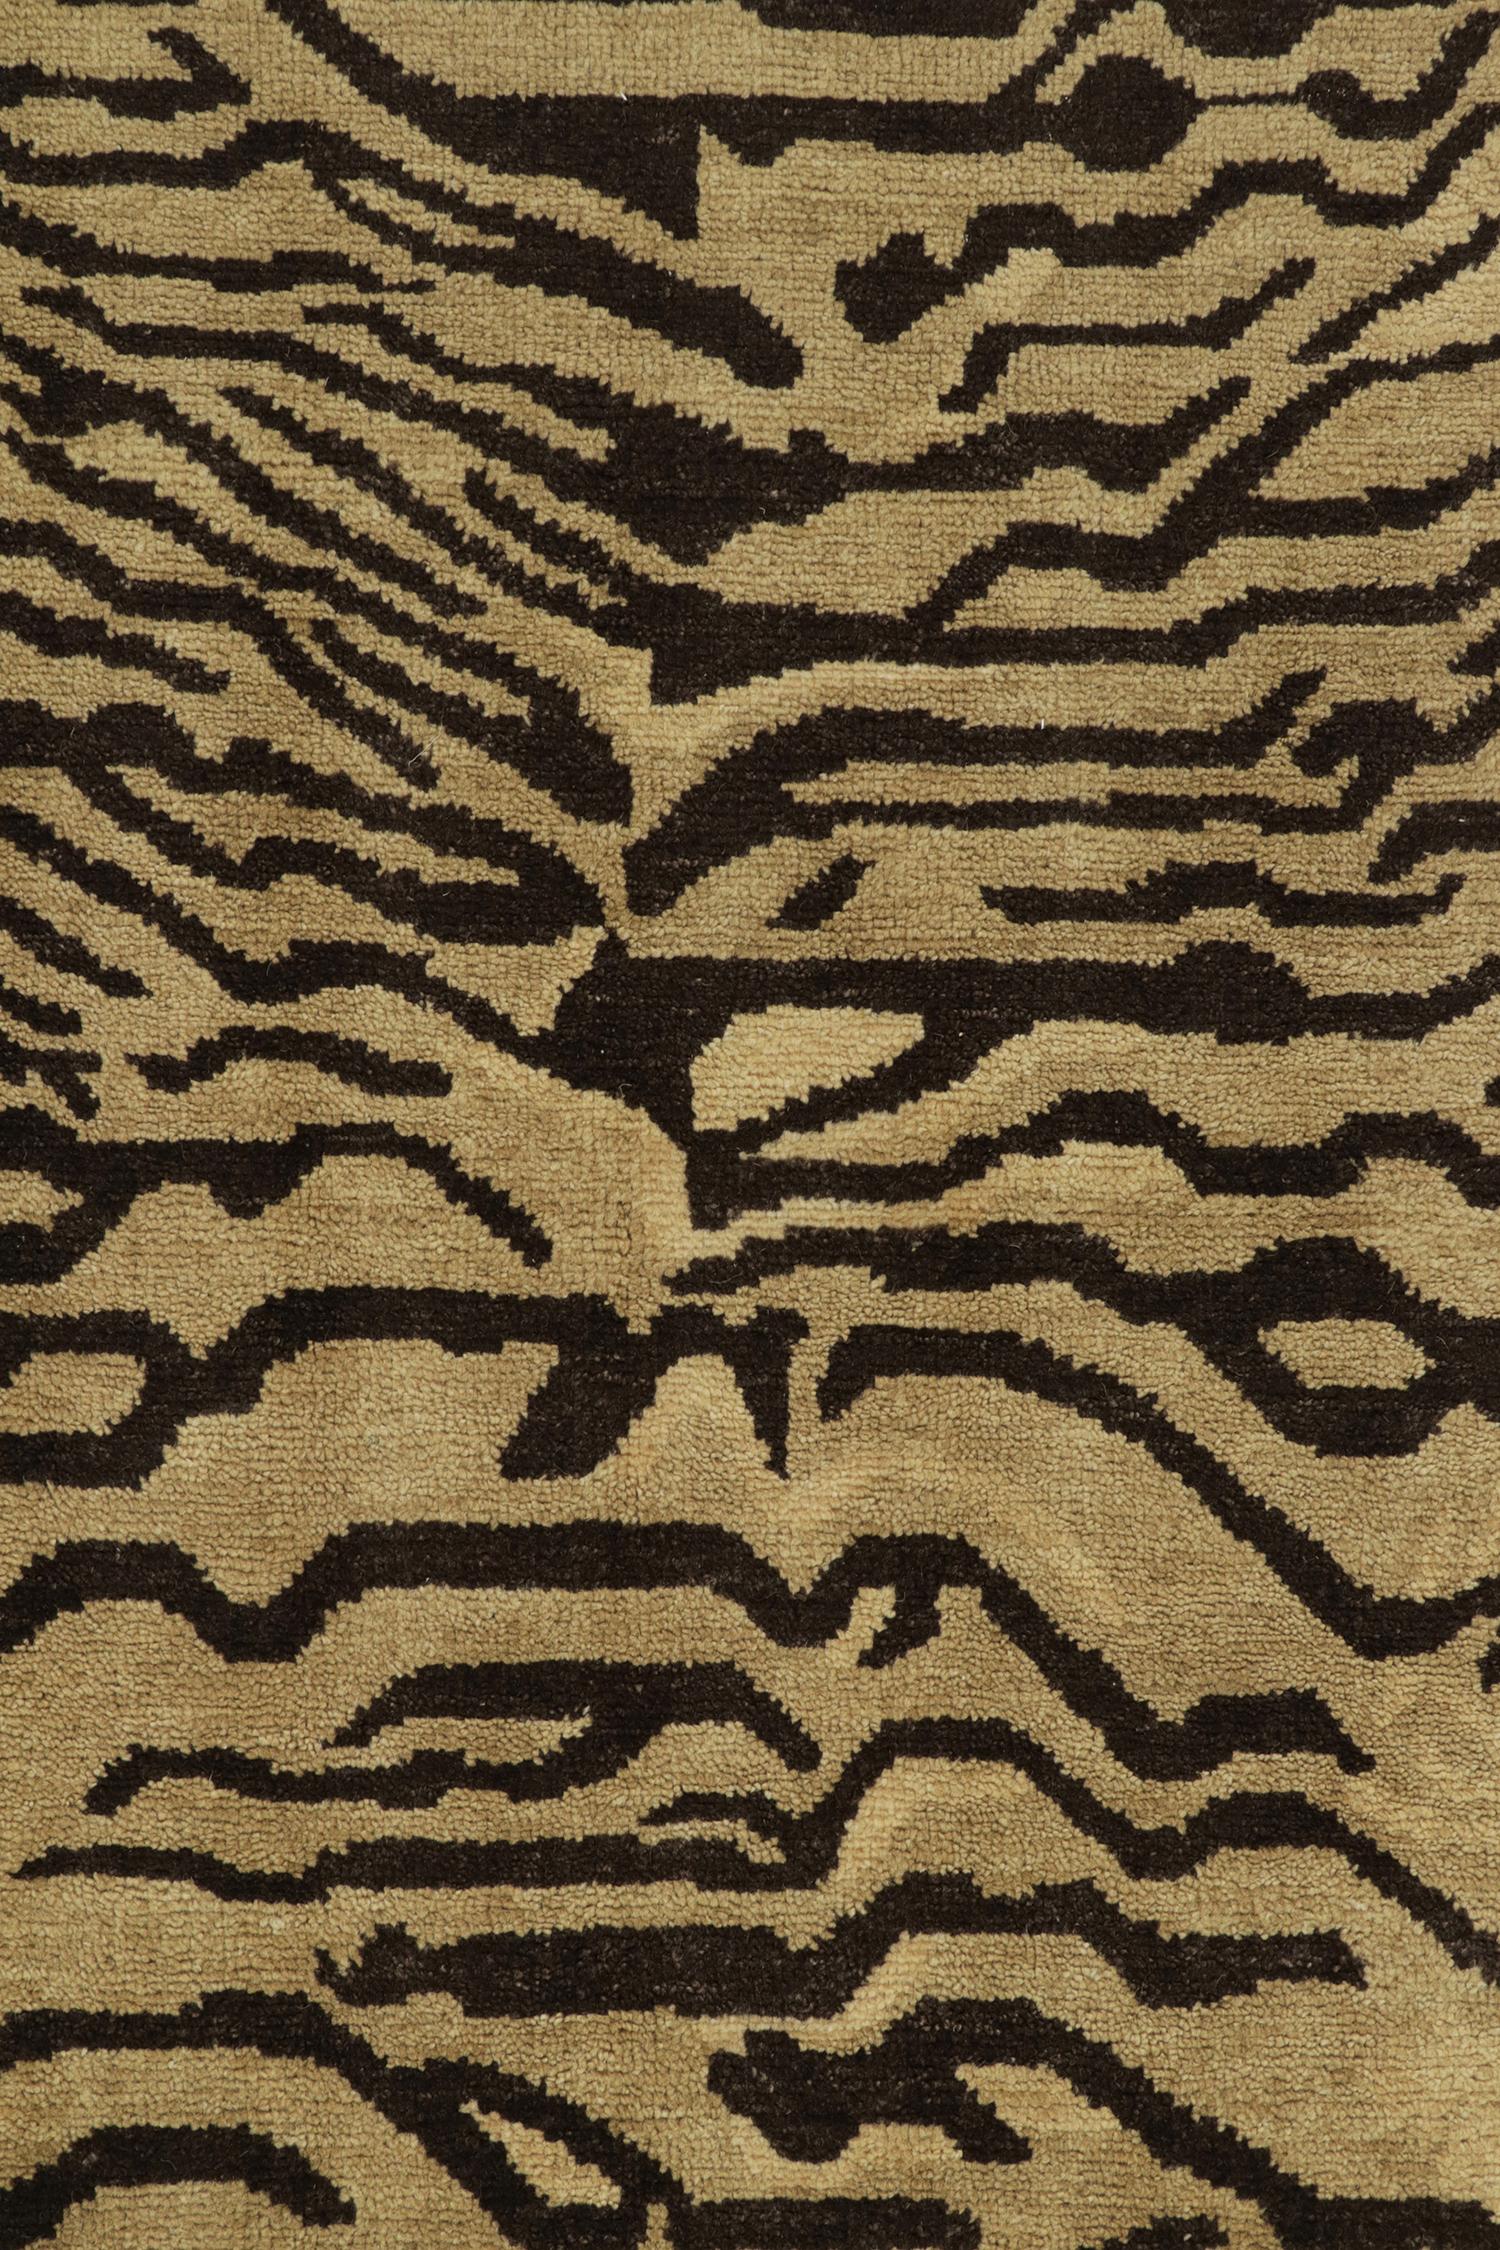 Rug & Kilim's Tiger Skin Style Contemporary Runner, Gold, Orange, Black In New Condition For Sale In Long Island City, NY